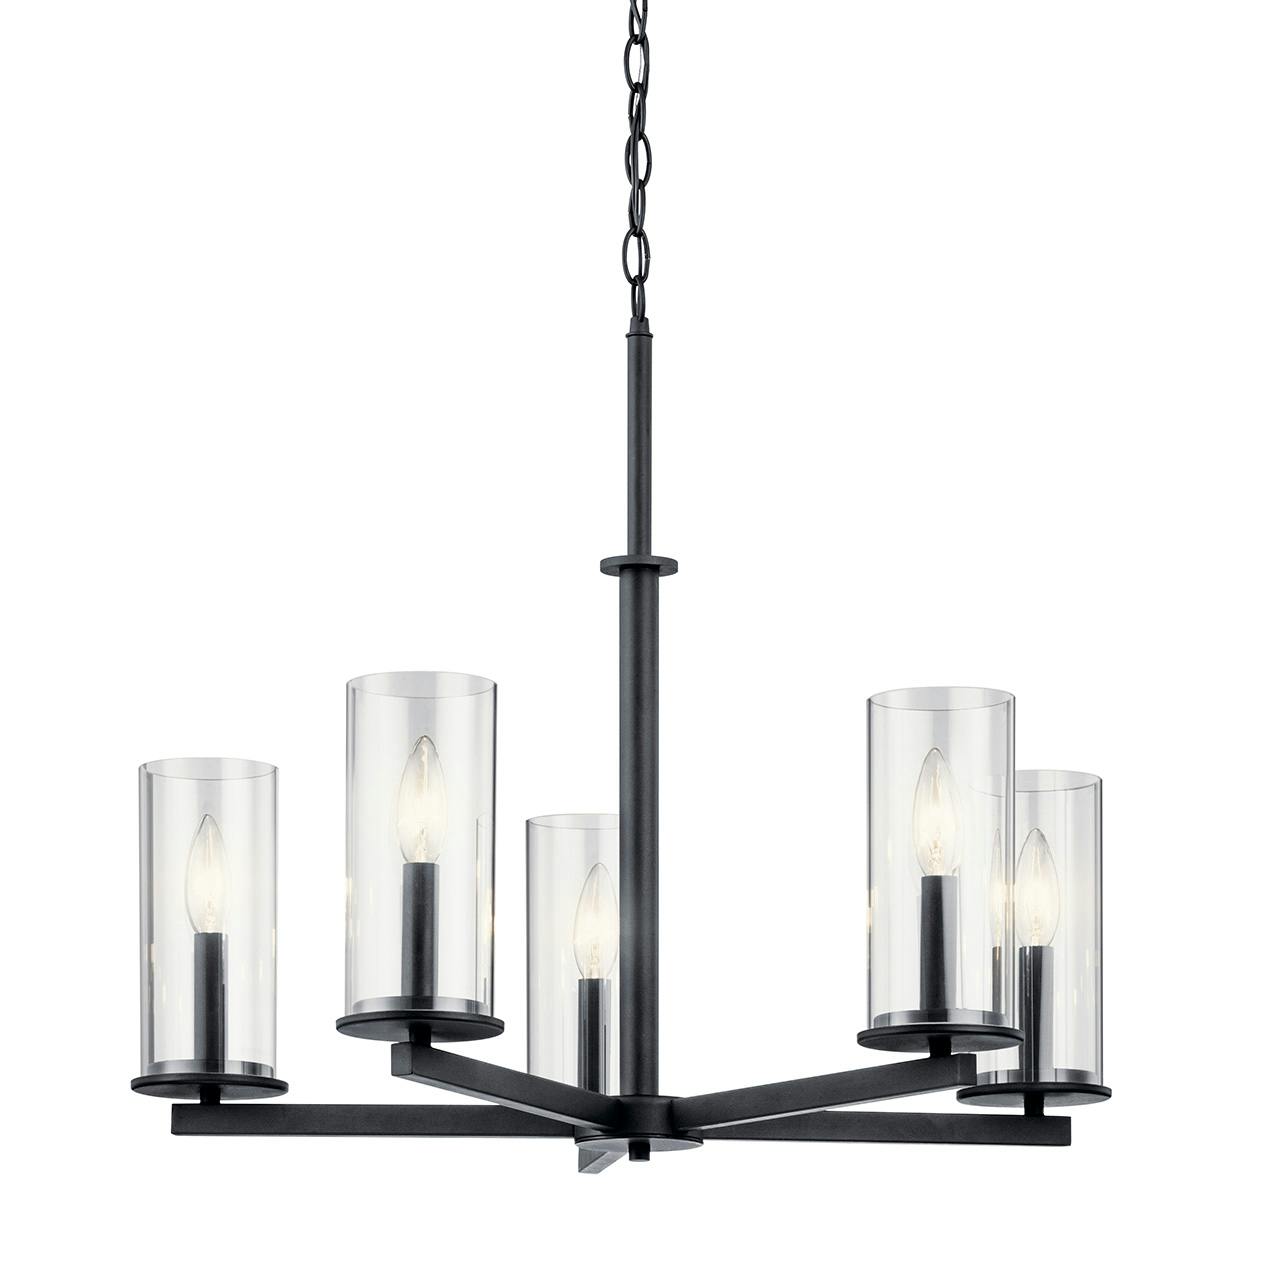 Crosby 5 Light Chandelier Black without the canopy on a white background